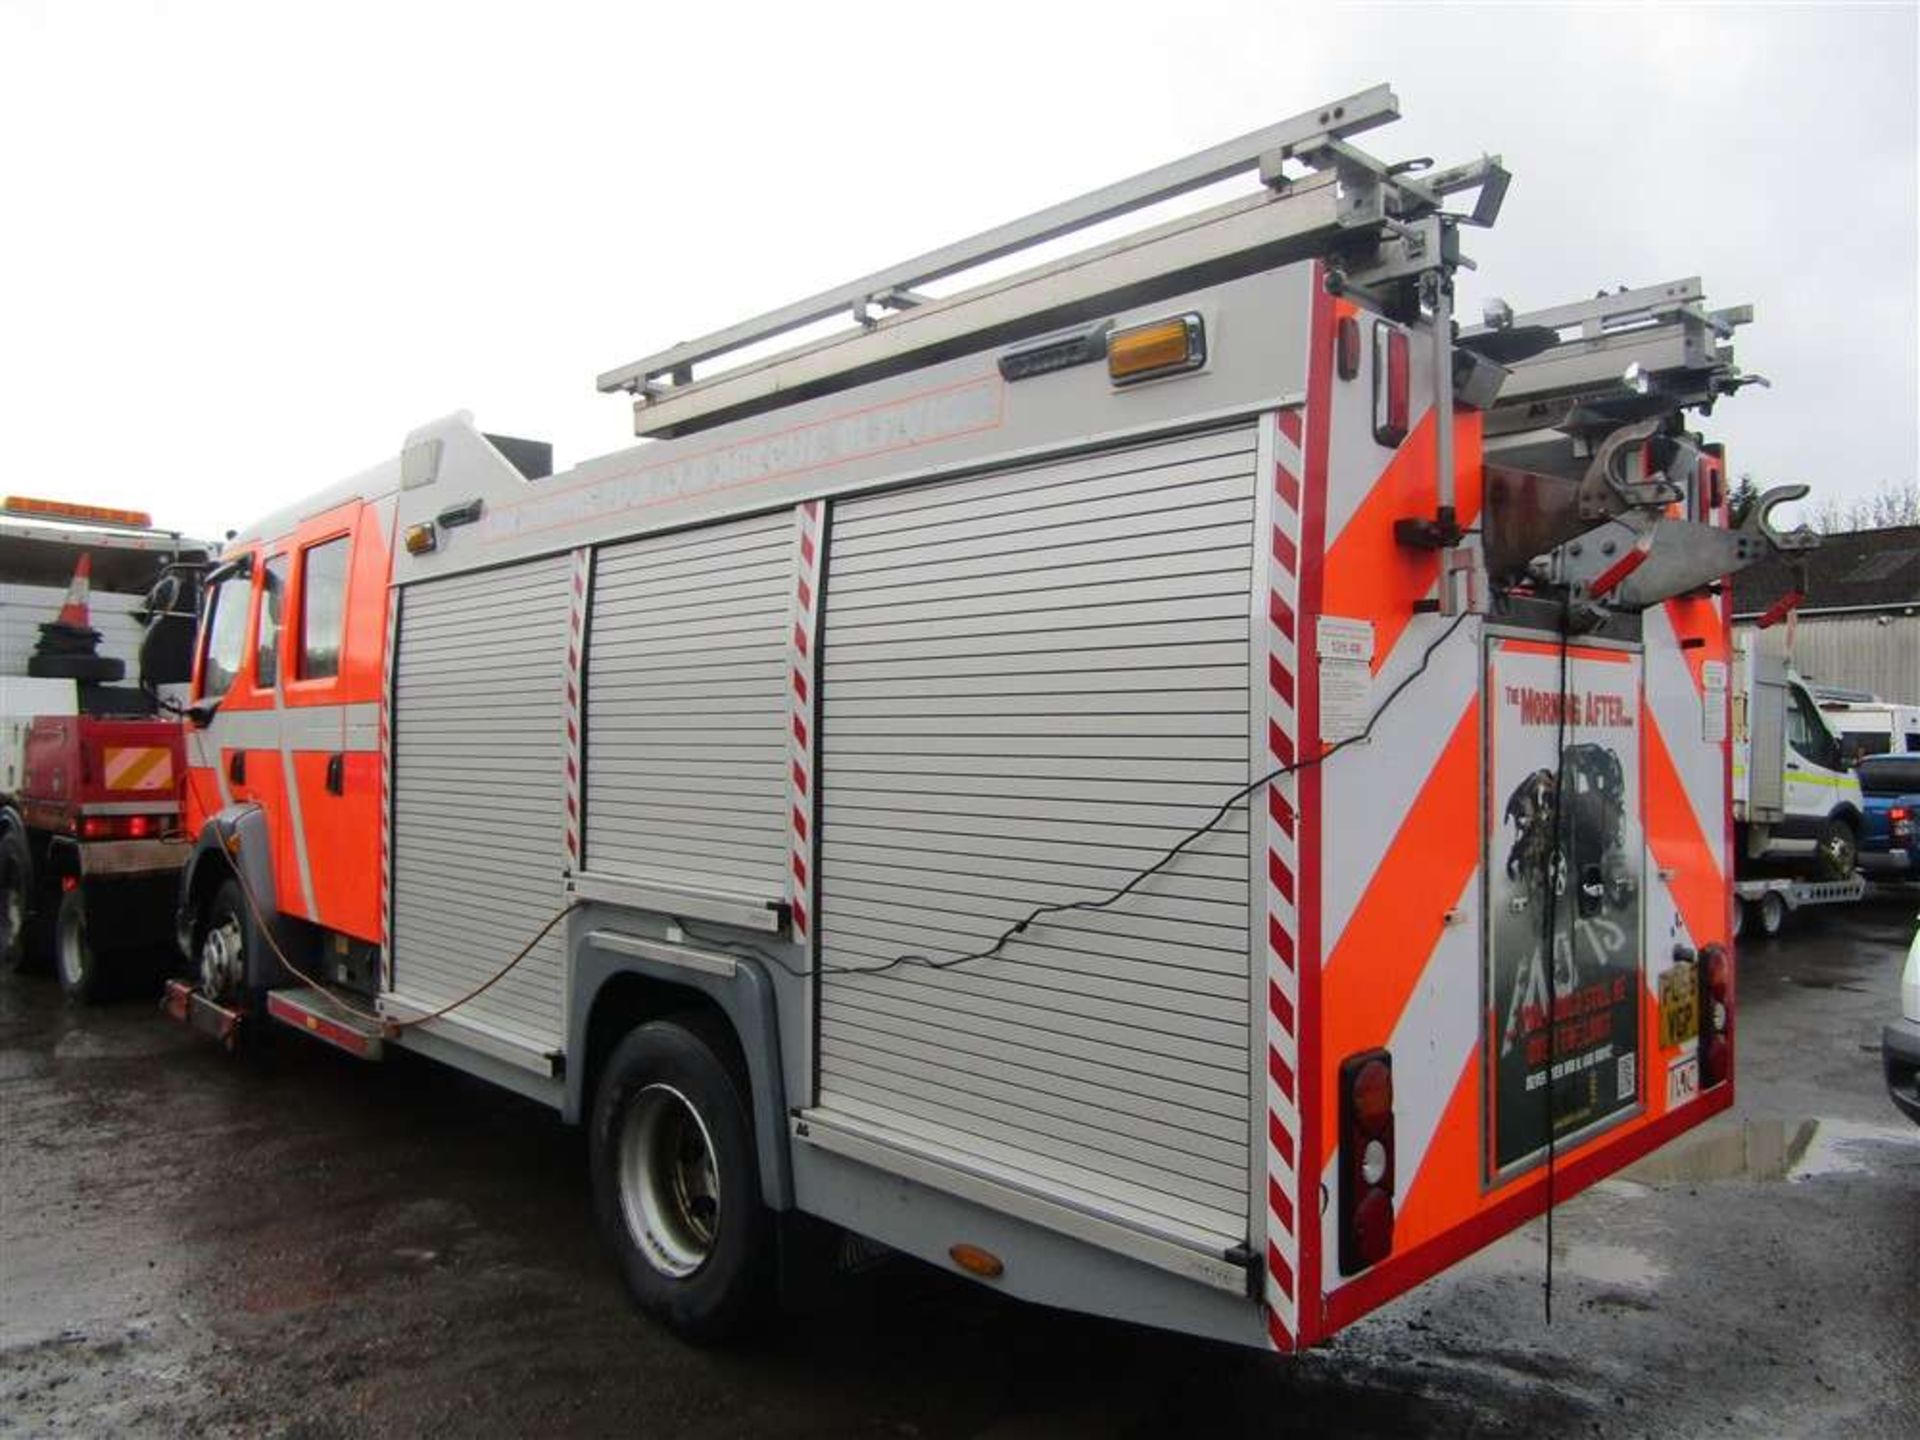 2006 56 reg DAF FA LF55.250 Fire Engine (Non Runner) (Direct Lancs Fire & Rescue) - Image 3 of 5